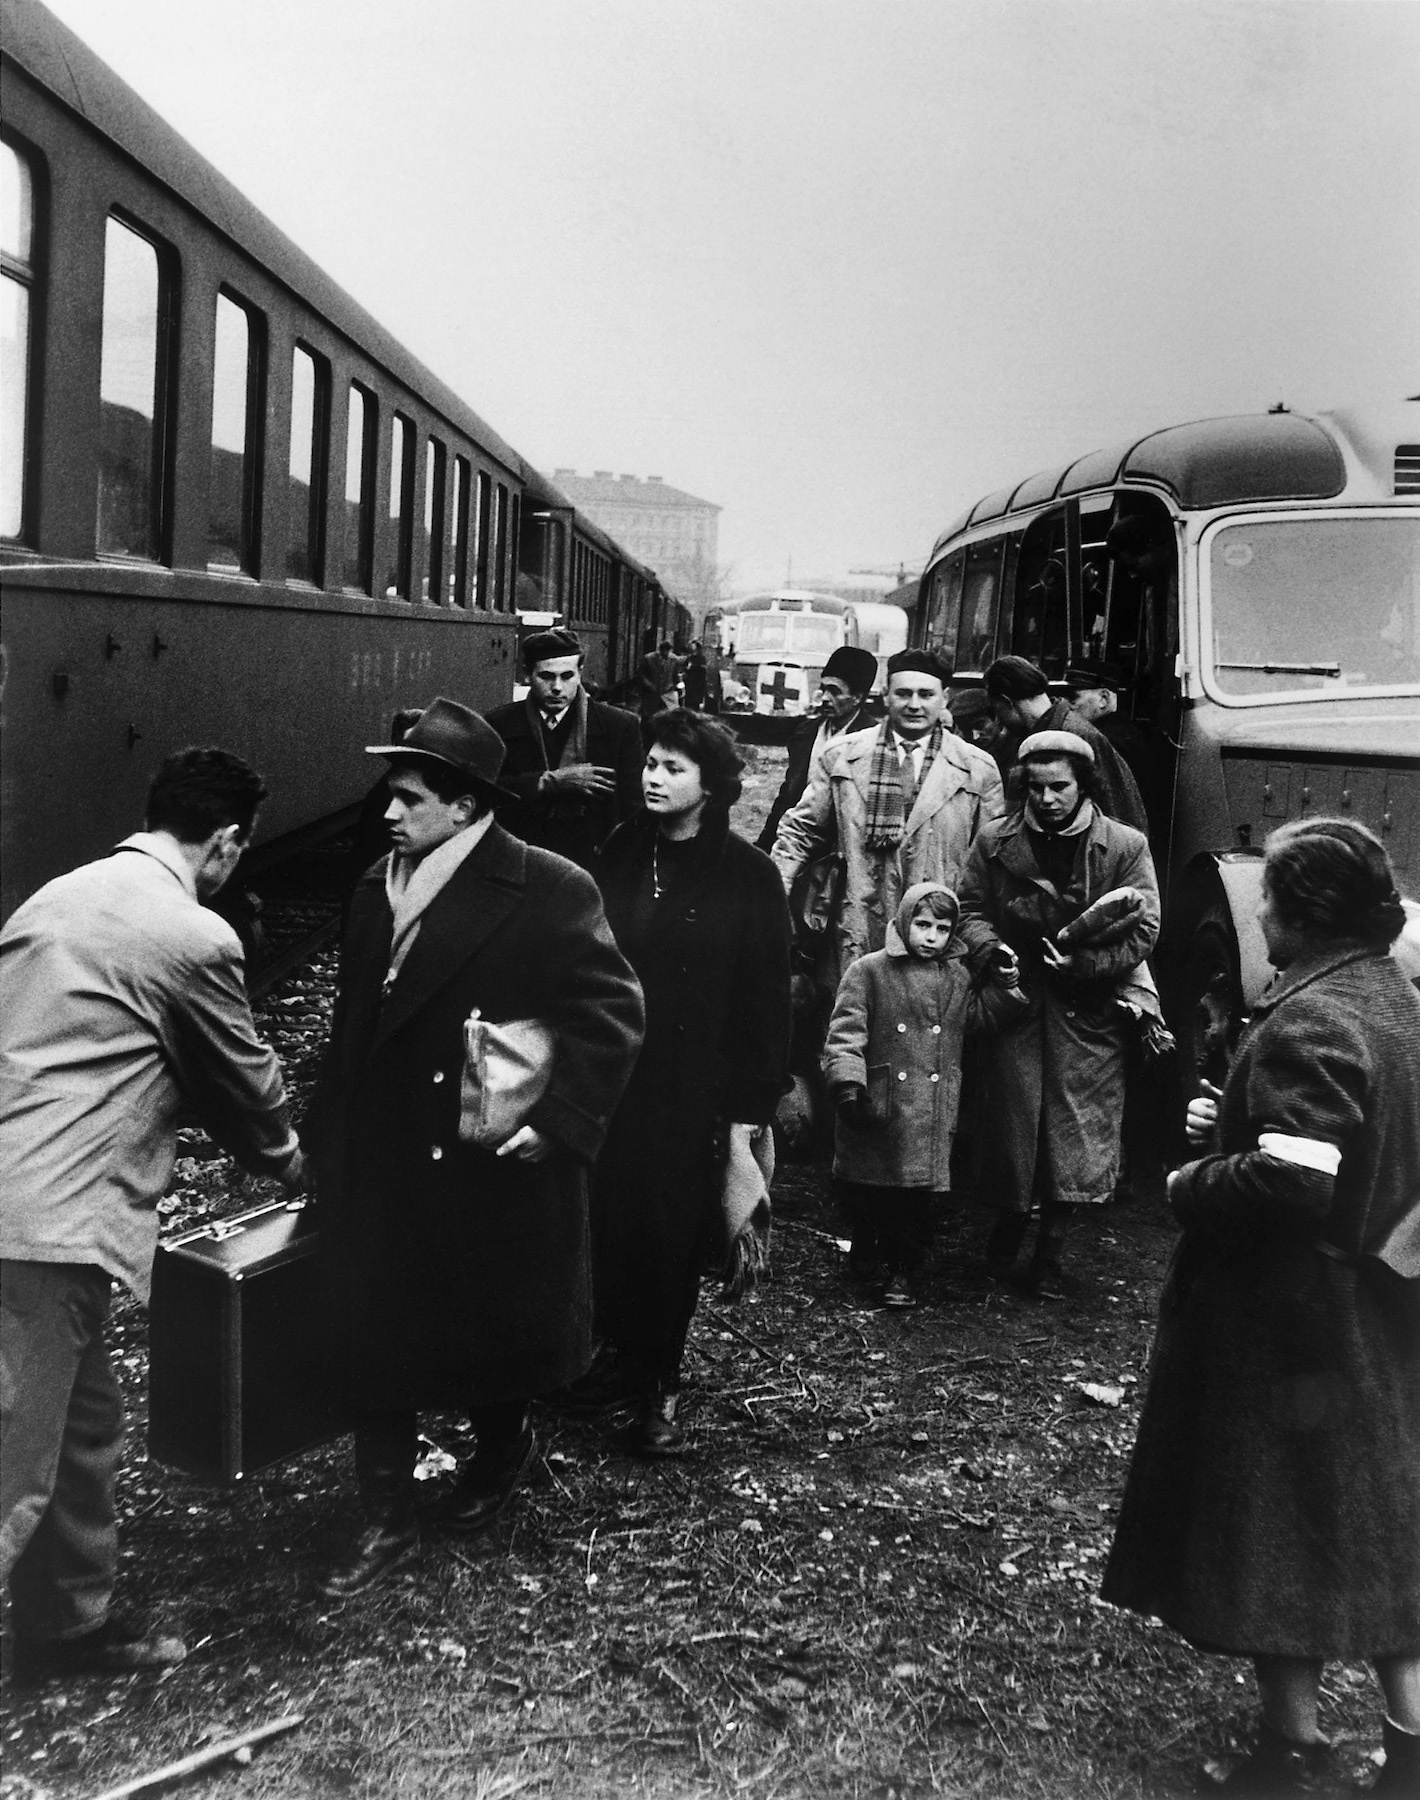 Hungarian refugees taking a train to Switzerland, 1956. Original Black and white picture